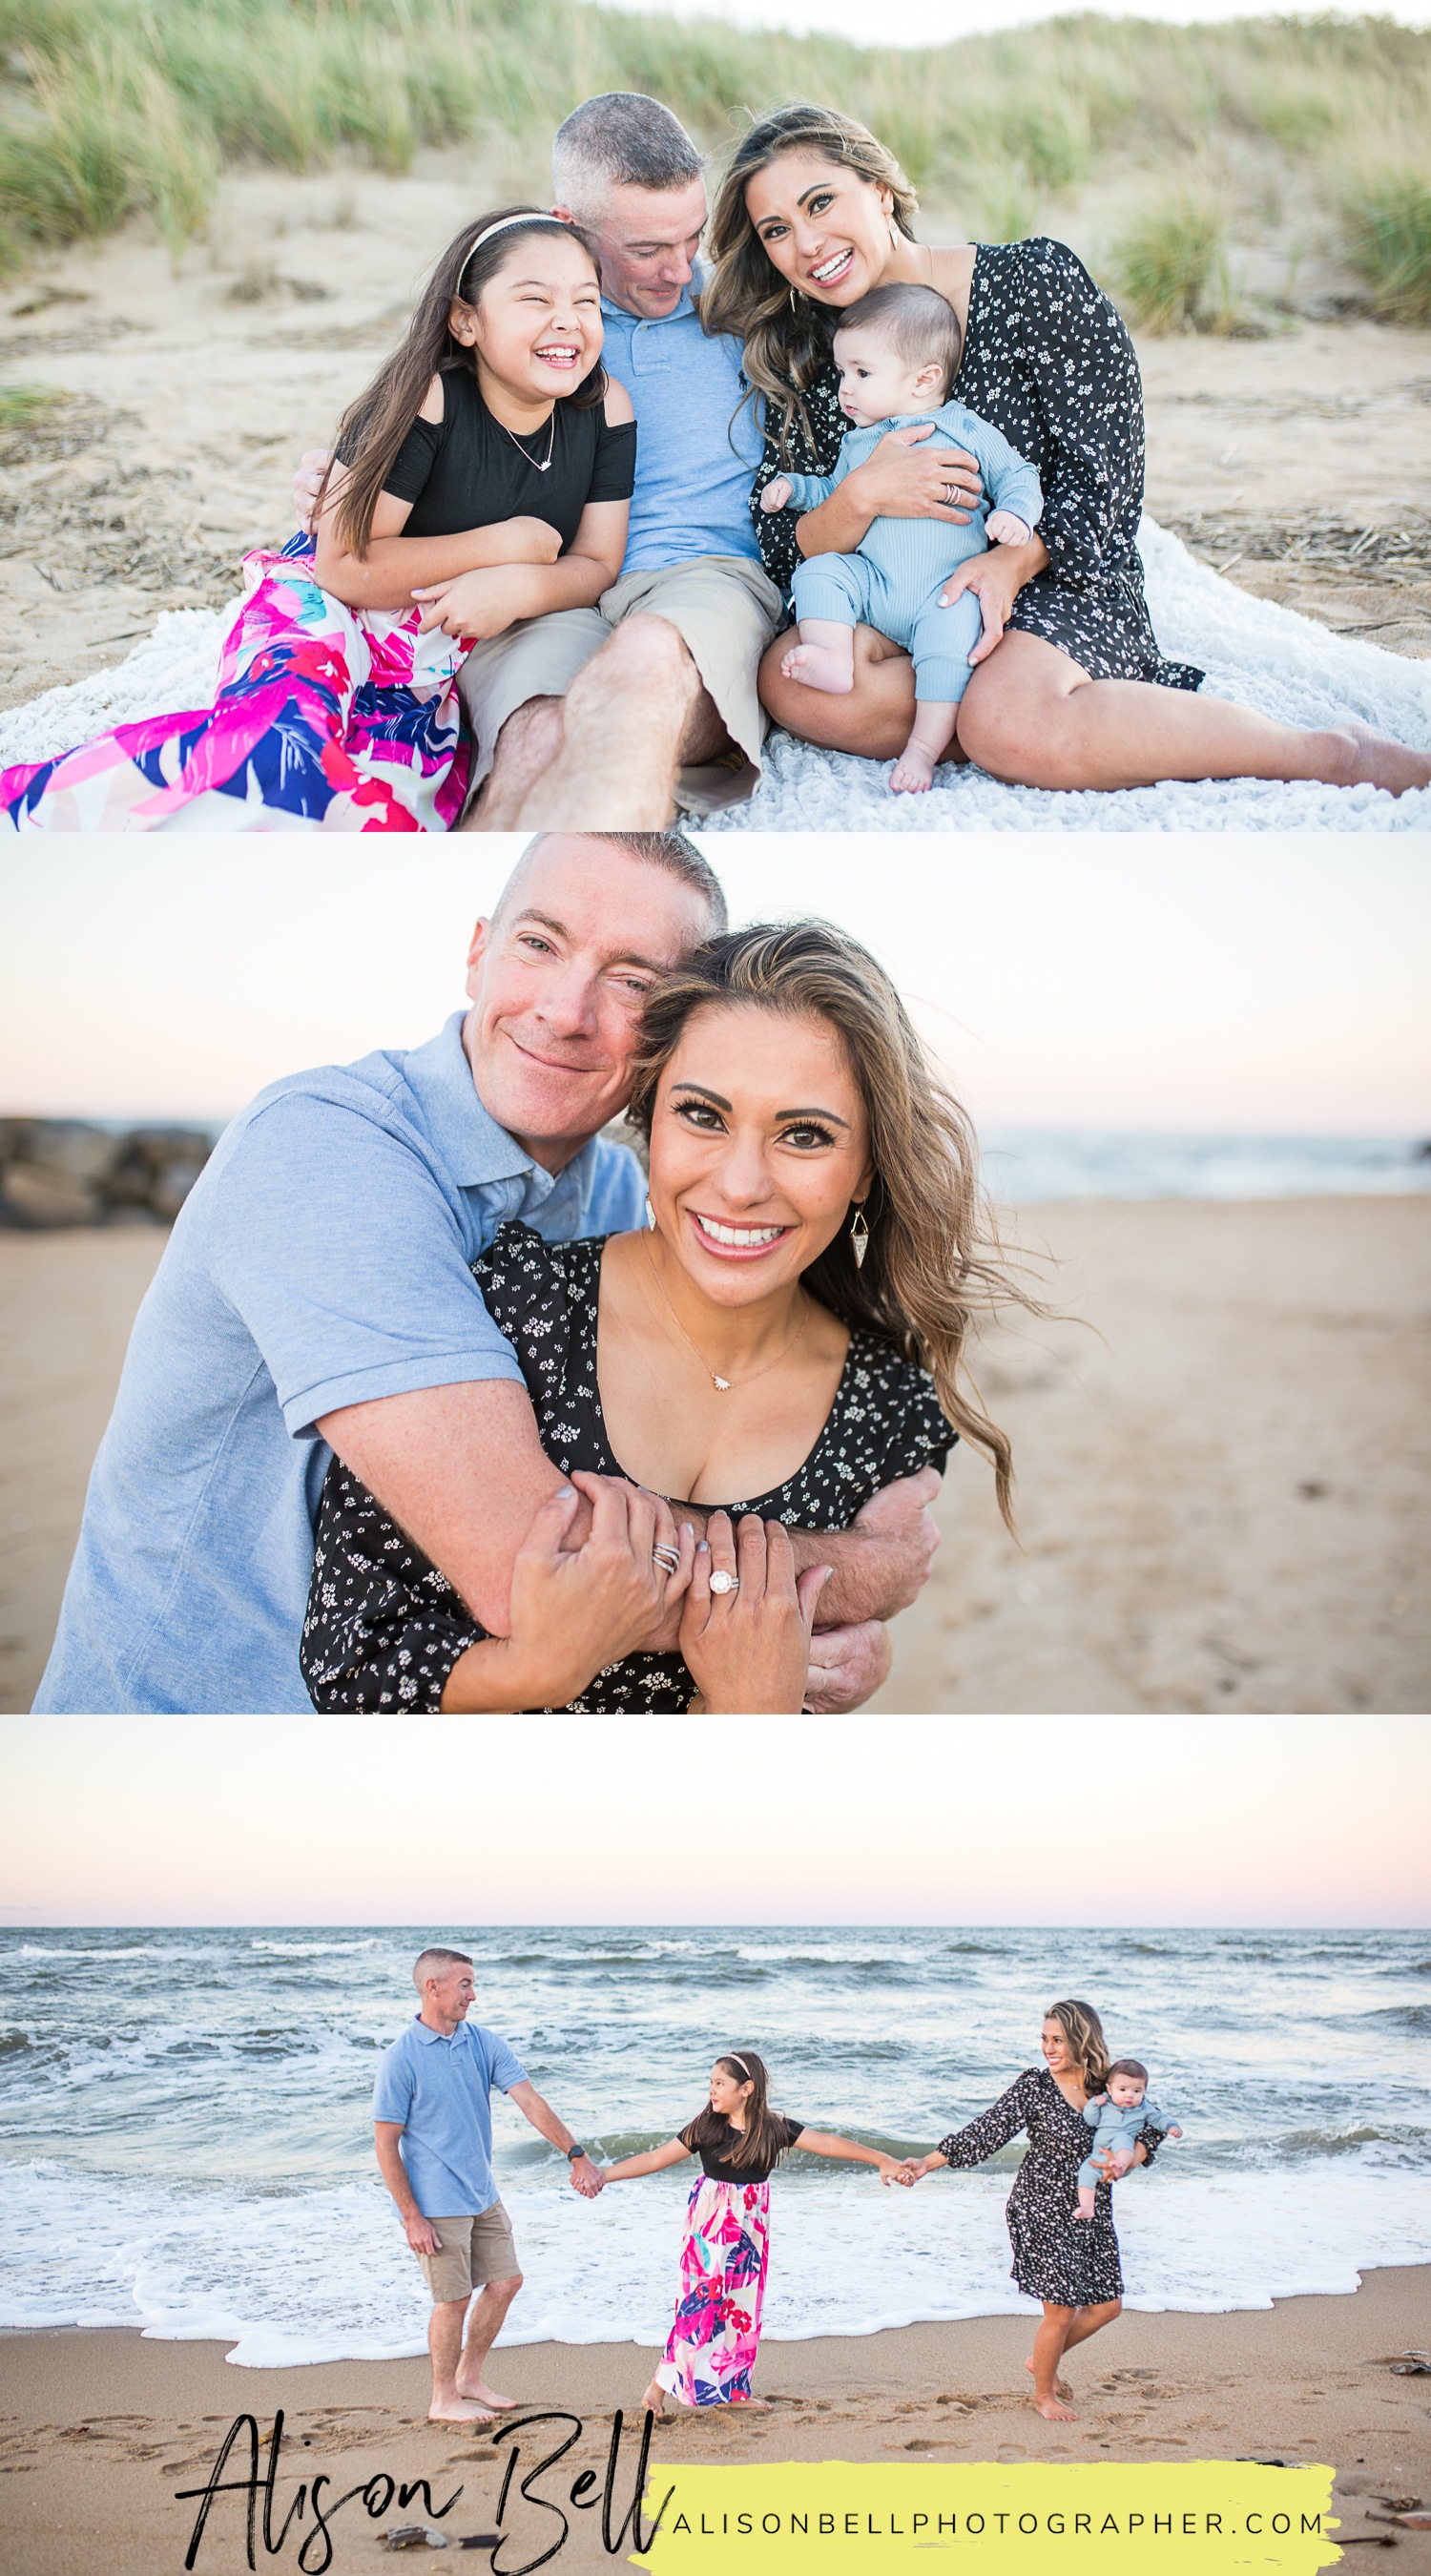 Fort story family photo session on the beach